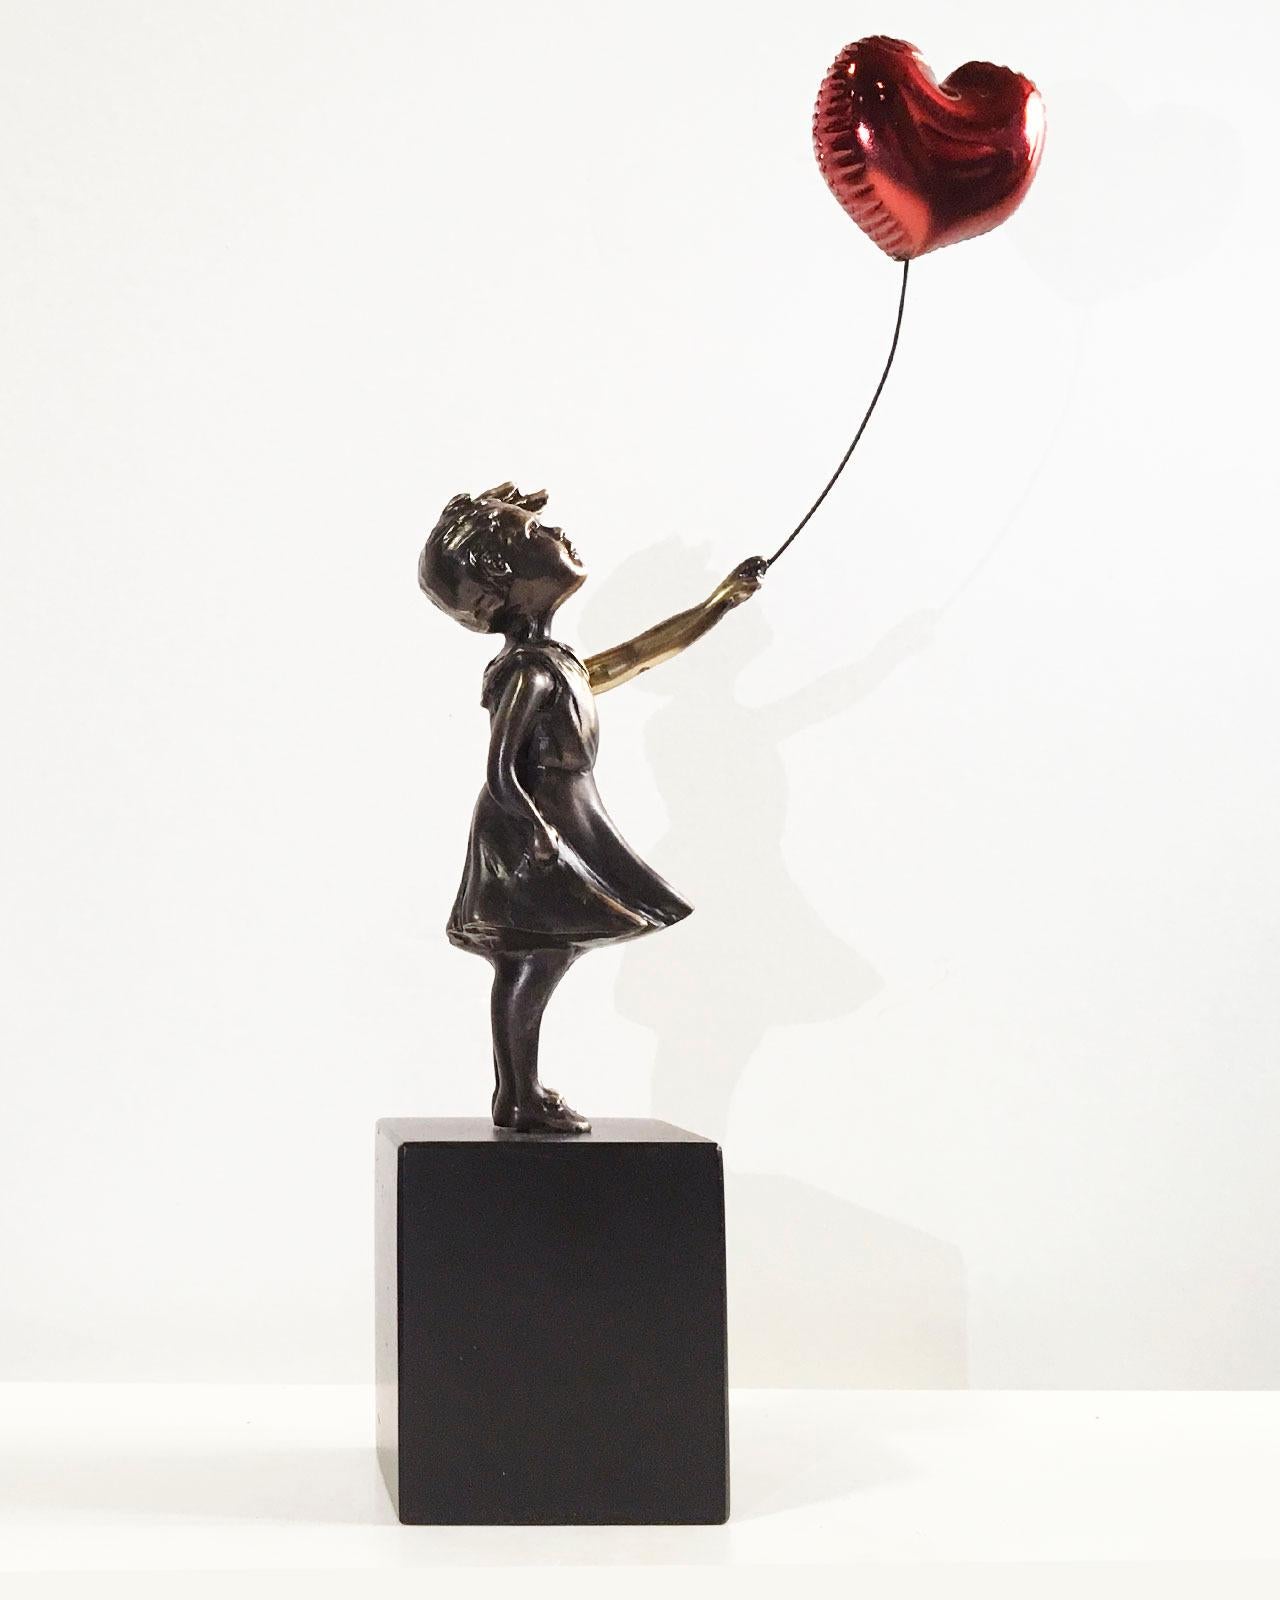 Street Art Sculpture "Girl with red balloon" by Miguel Guía.
This sculpture is made by lost wax bronze casting.
Limited edition of 299 works.
Although the required time to deliver a shipment is usually between 3 and 10 days please do not hesitate to